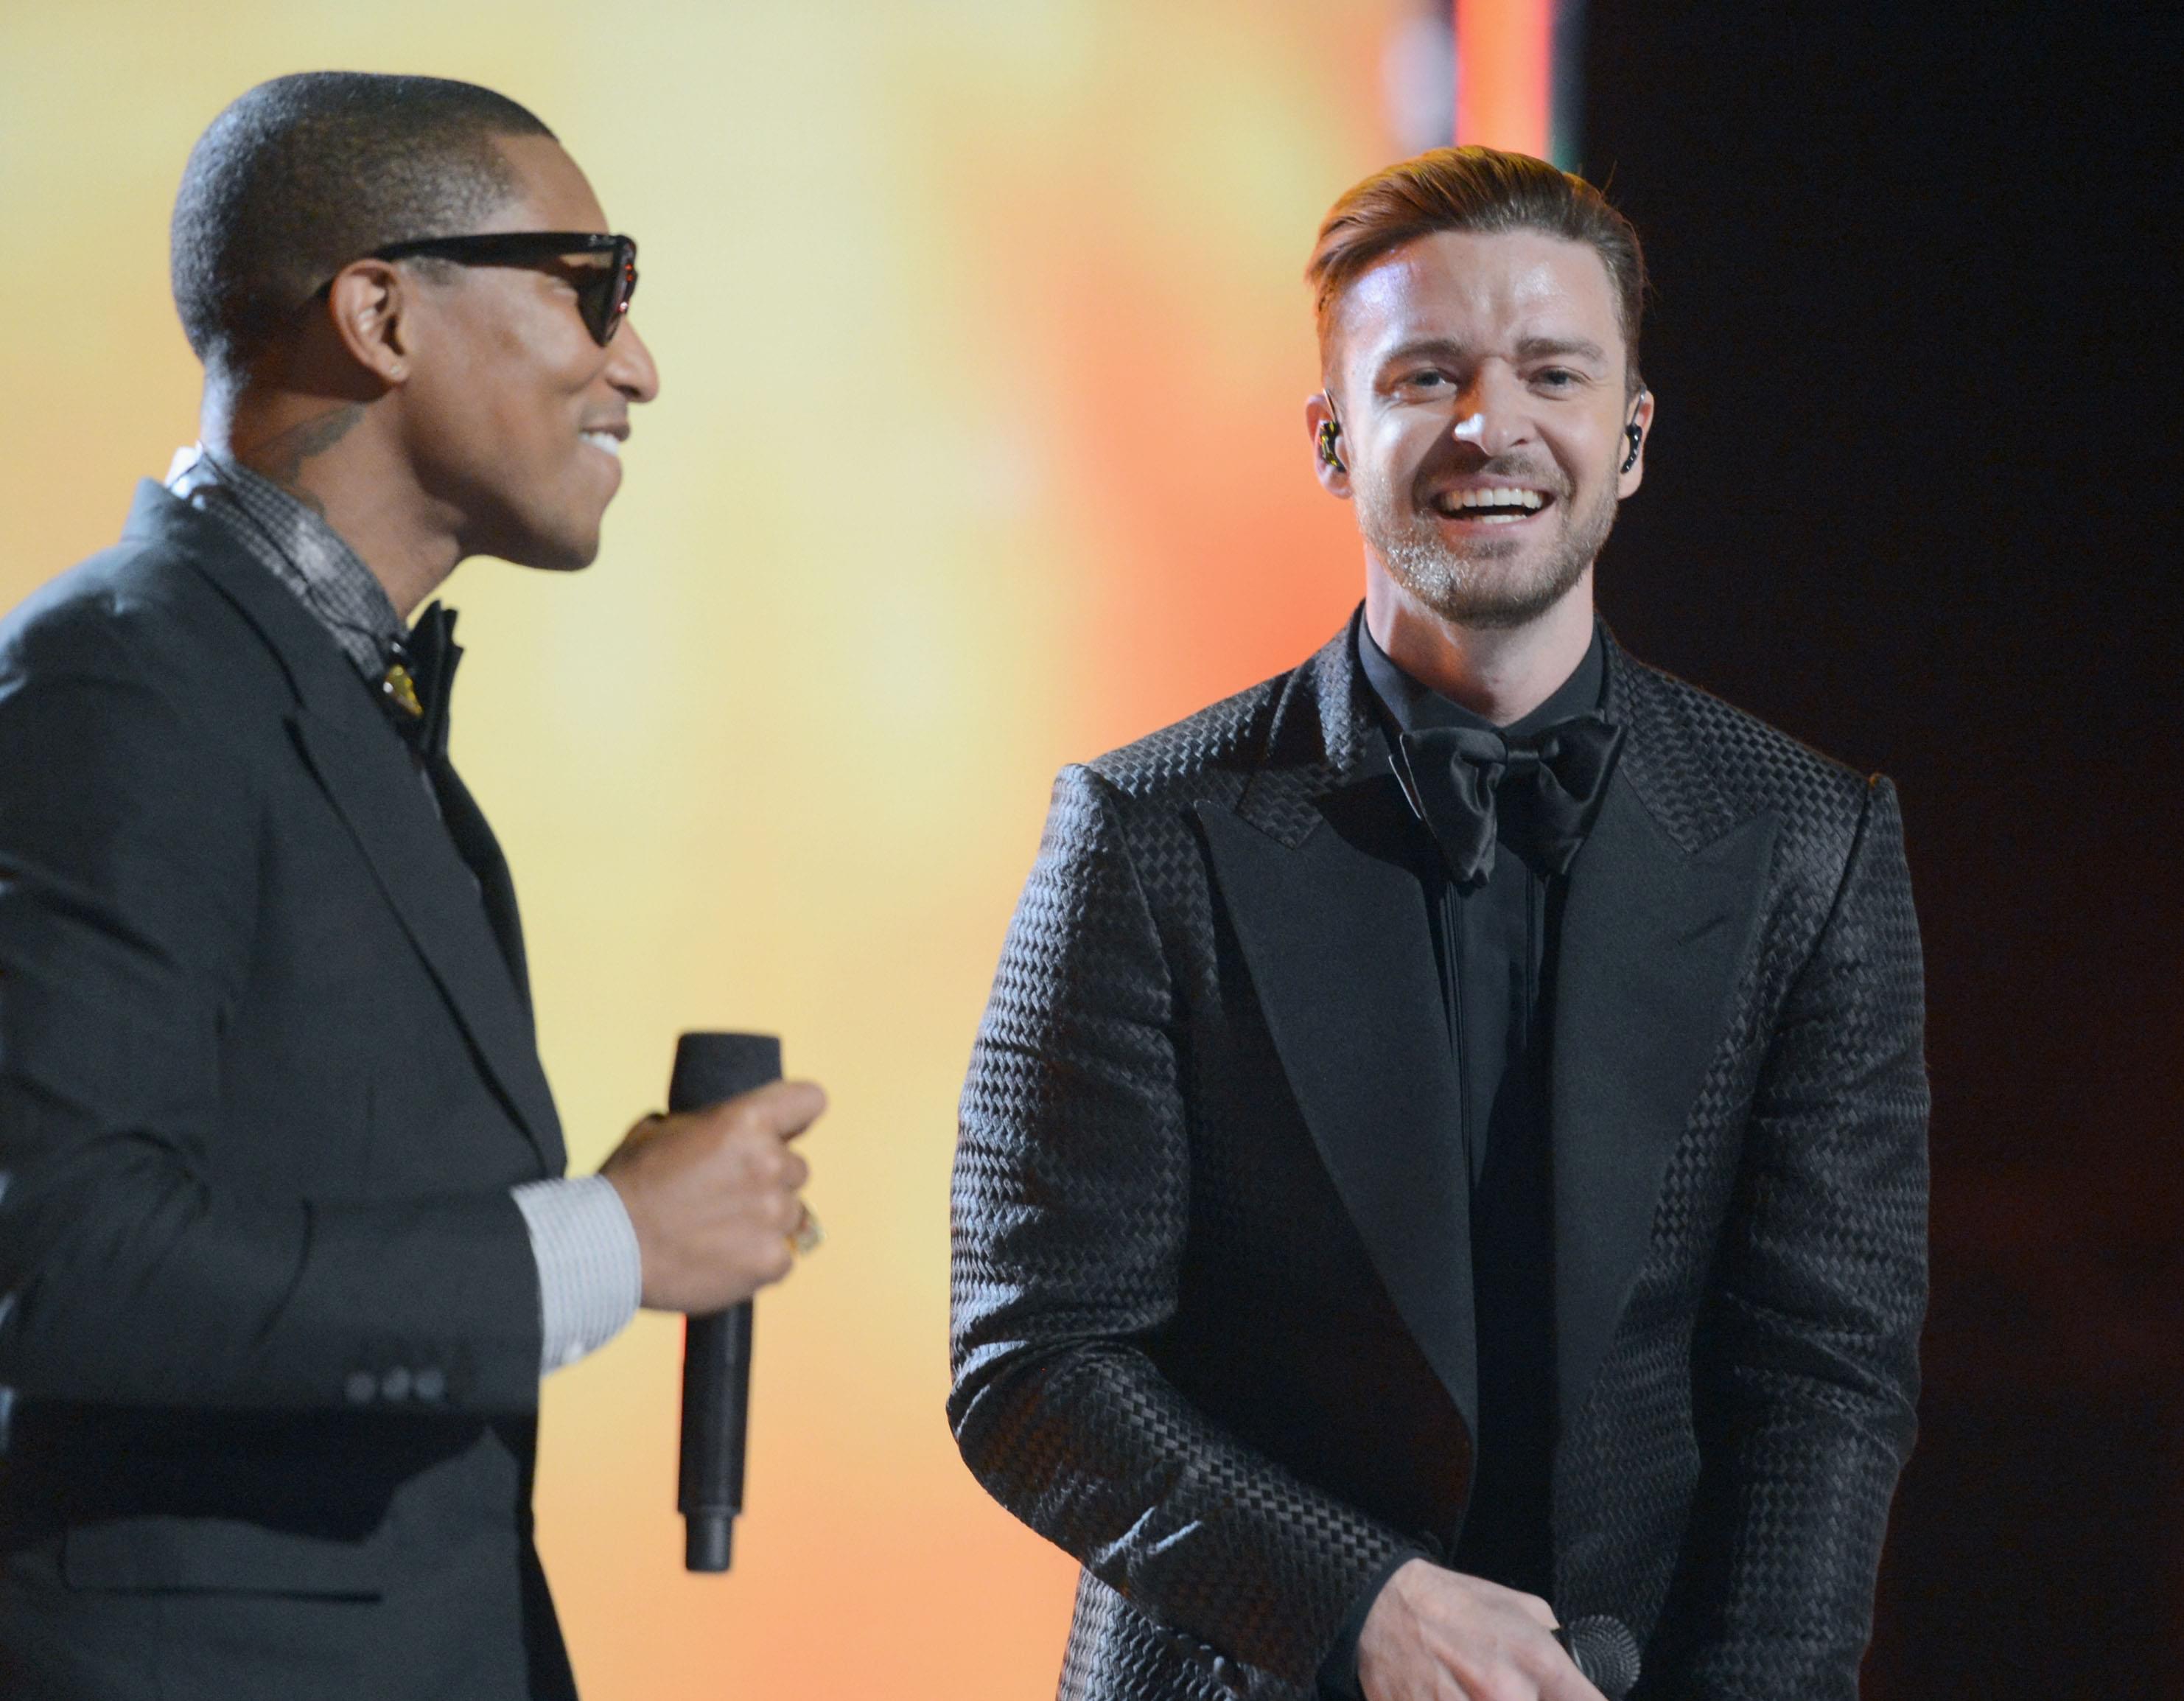 Justin Timberlake Talks About Working With Pharrell On His New Album